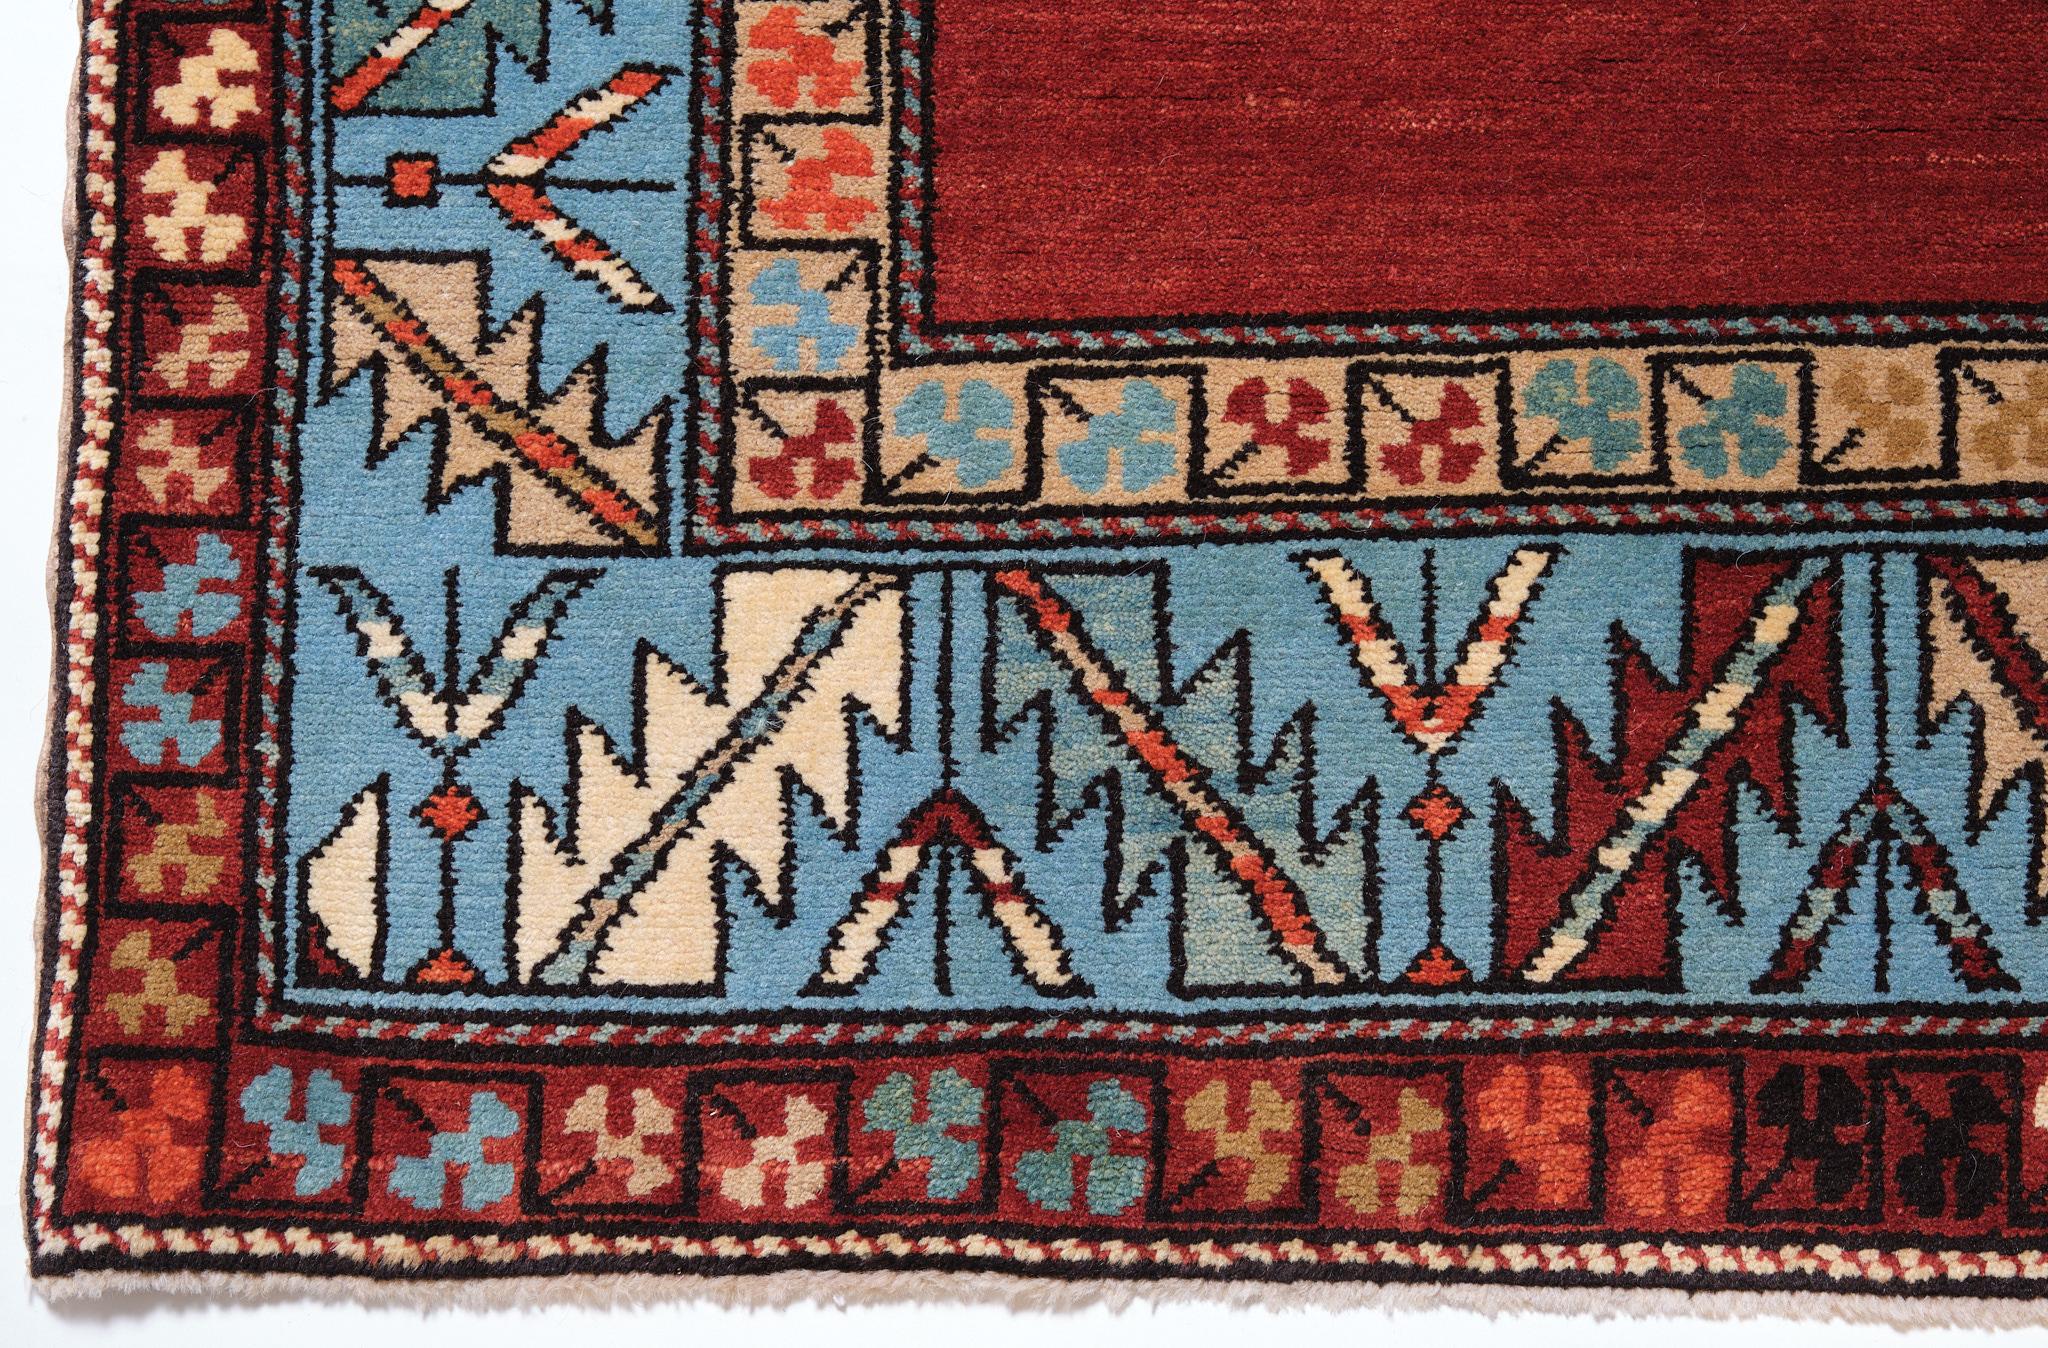 The source of the rug comes from the book Tapis du Caucase – Rugs of the Caucasus, Ian Bennett & Aziz Bassoul, The Nicholas Sursock Museum, Beirut, Lebanon 2003, nr.26-27. This is a famous design group of rugs with two medallions from the 19th